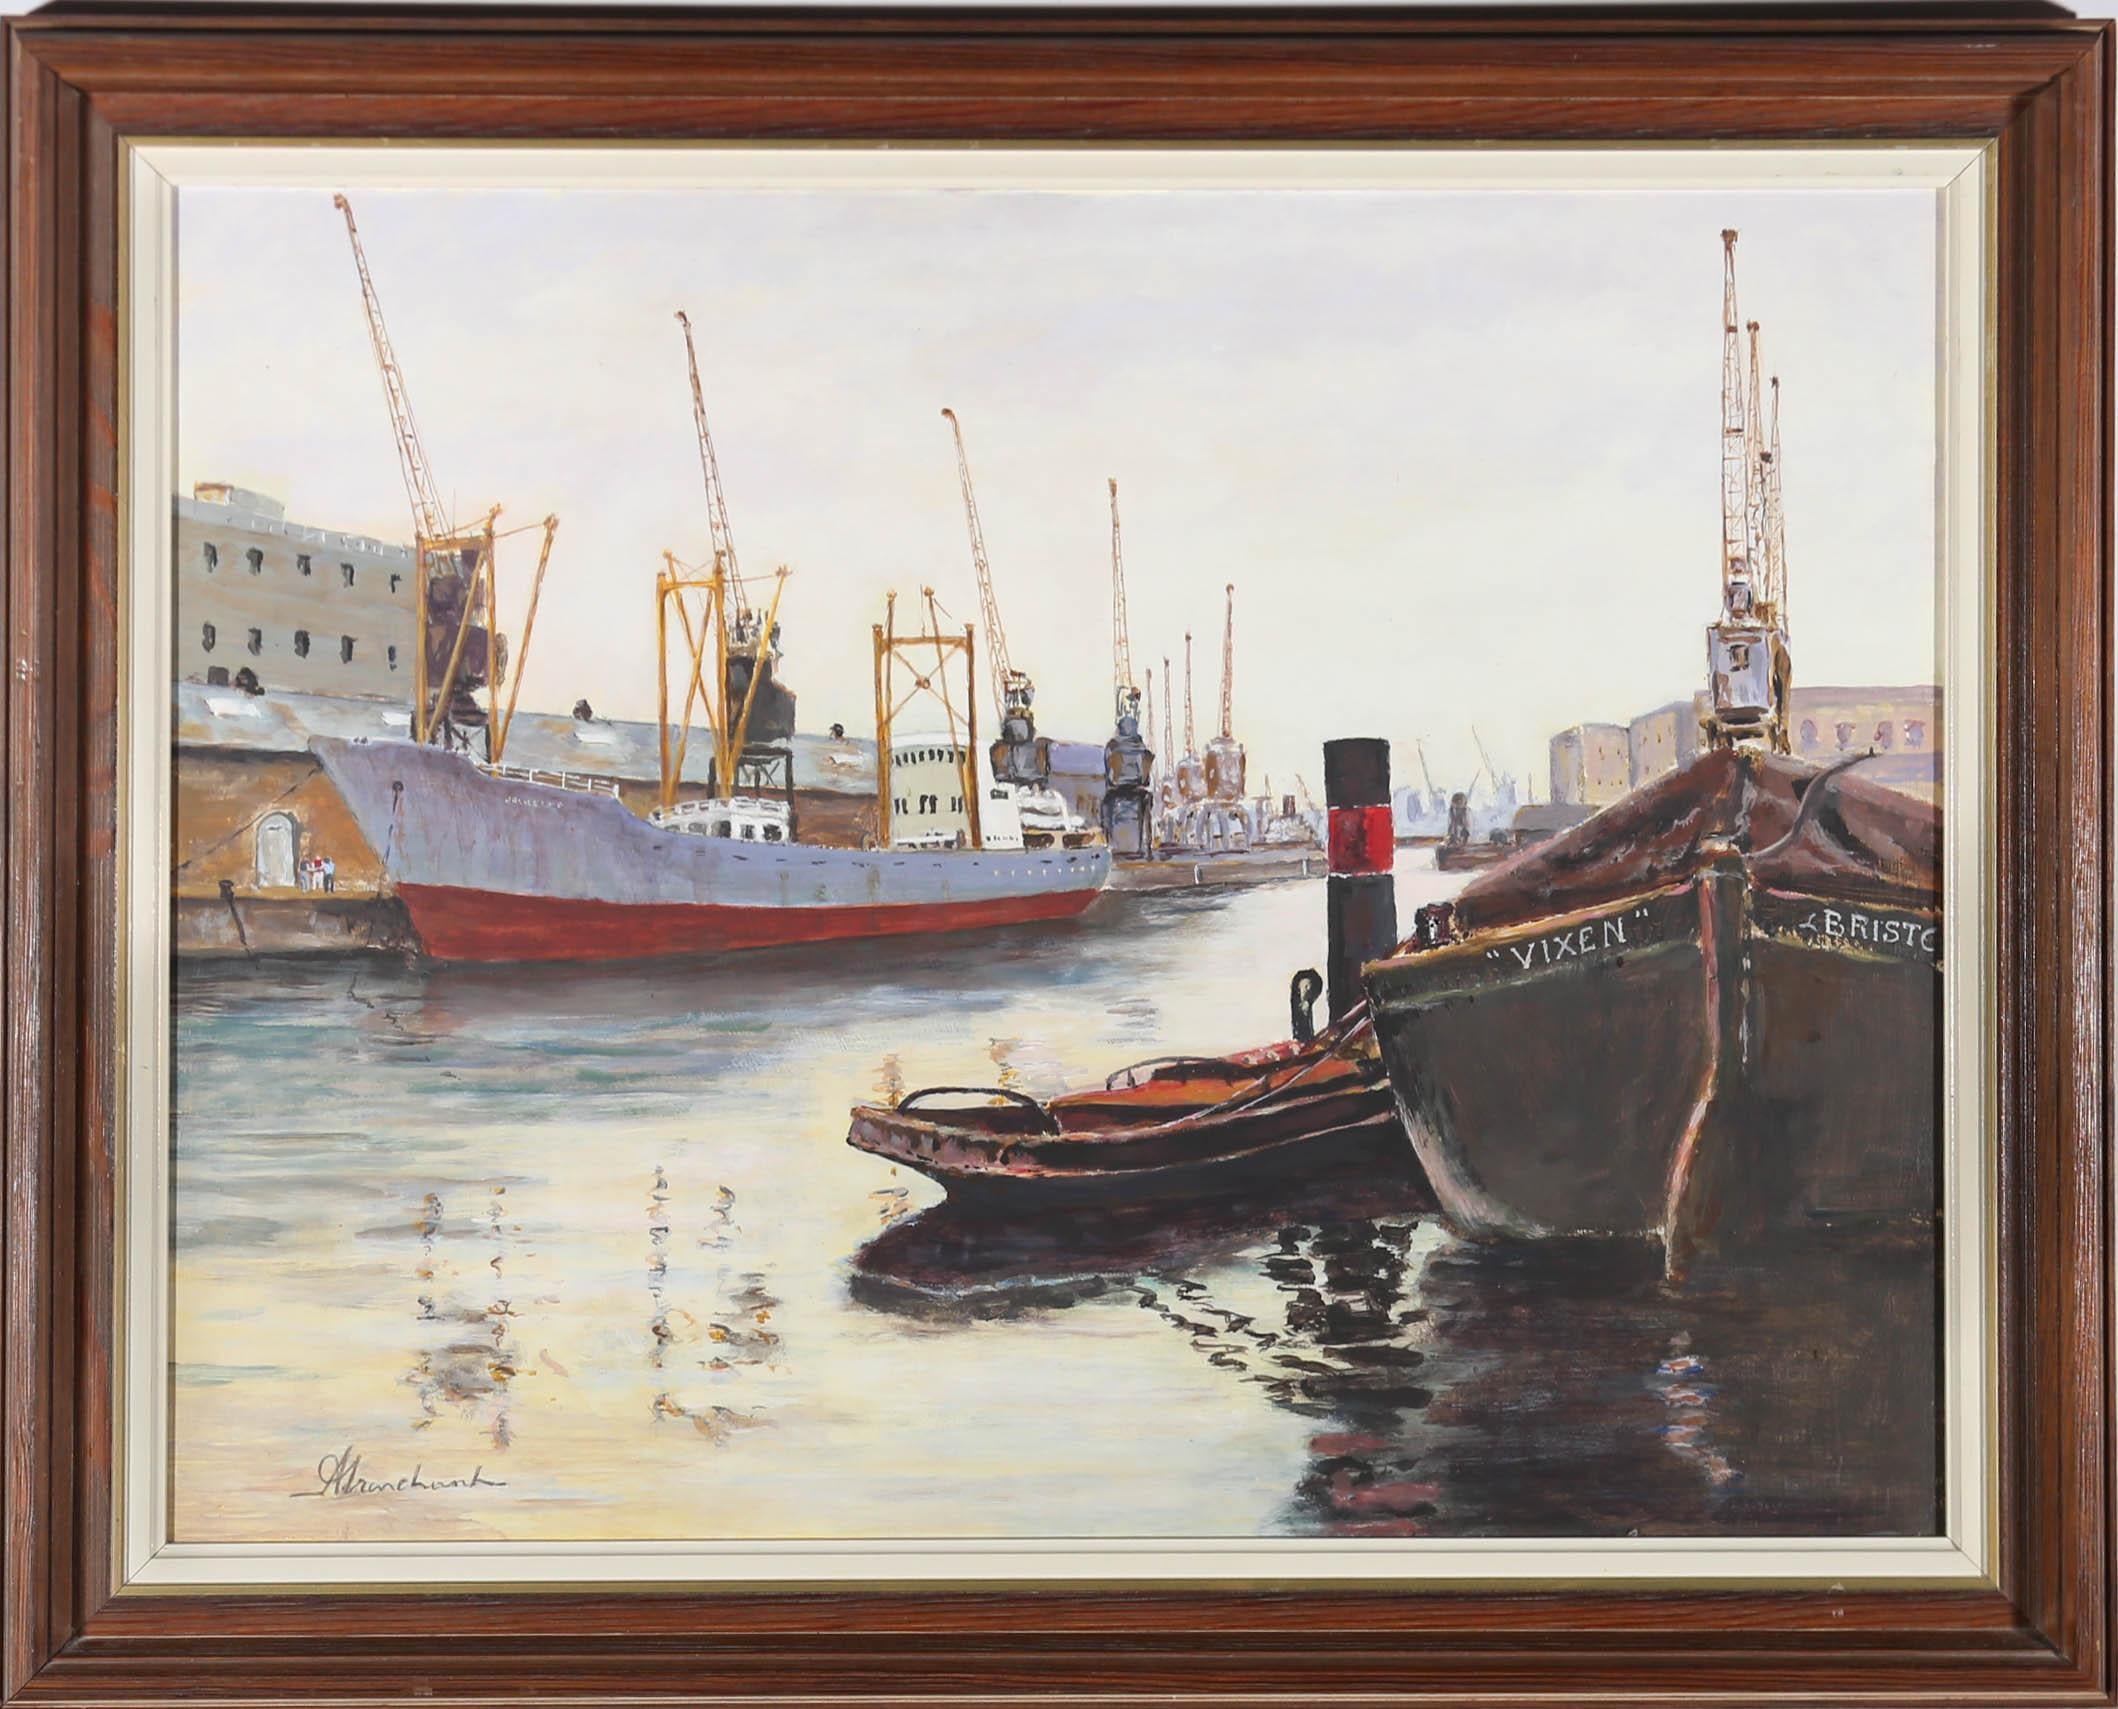 A charming depiction of a dockyard on a misty afternoon. The artist captures boats moored along the docks with large cranes towering overhead. Presented in a wooden frame. On board.